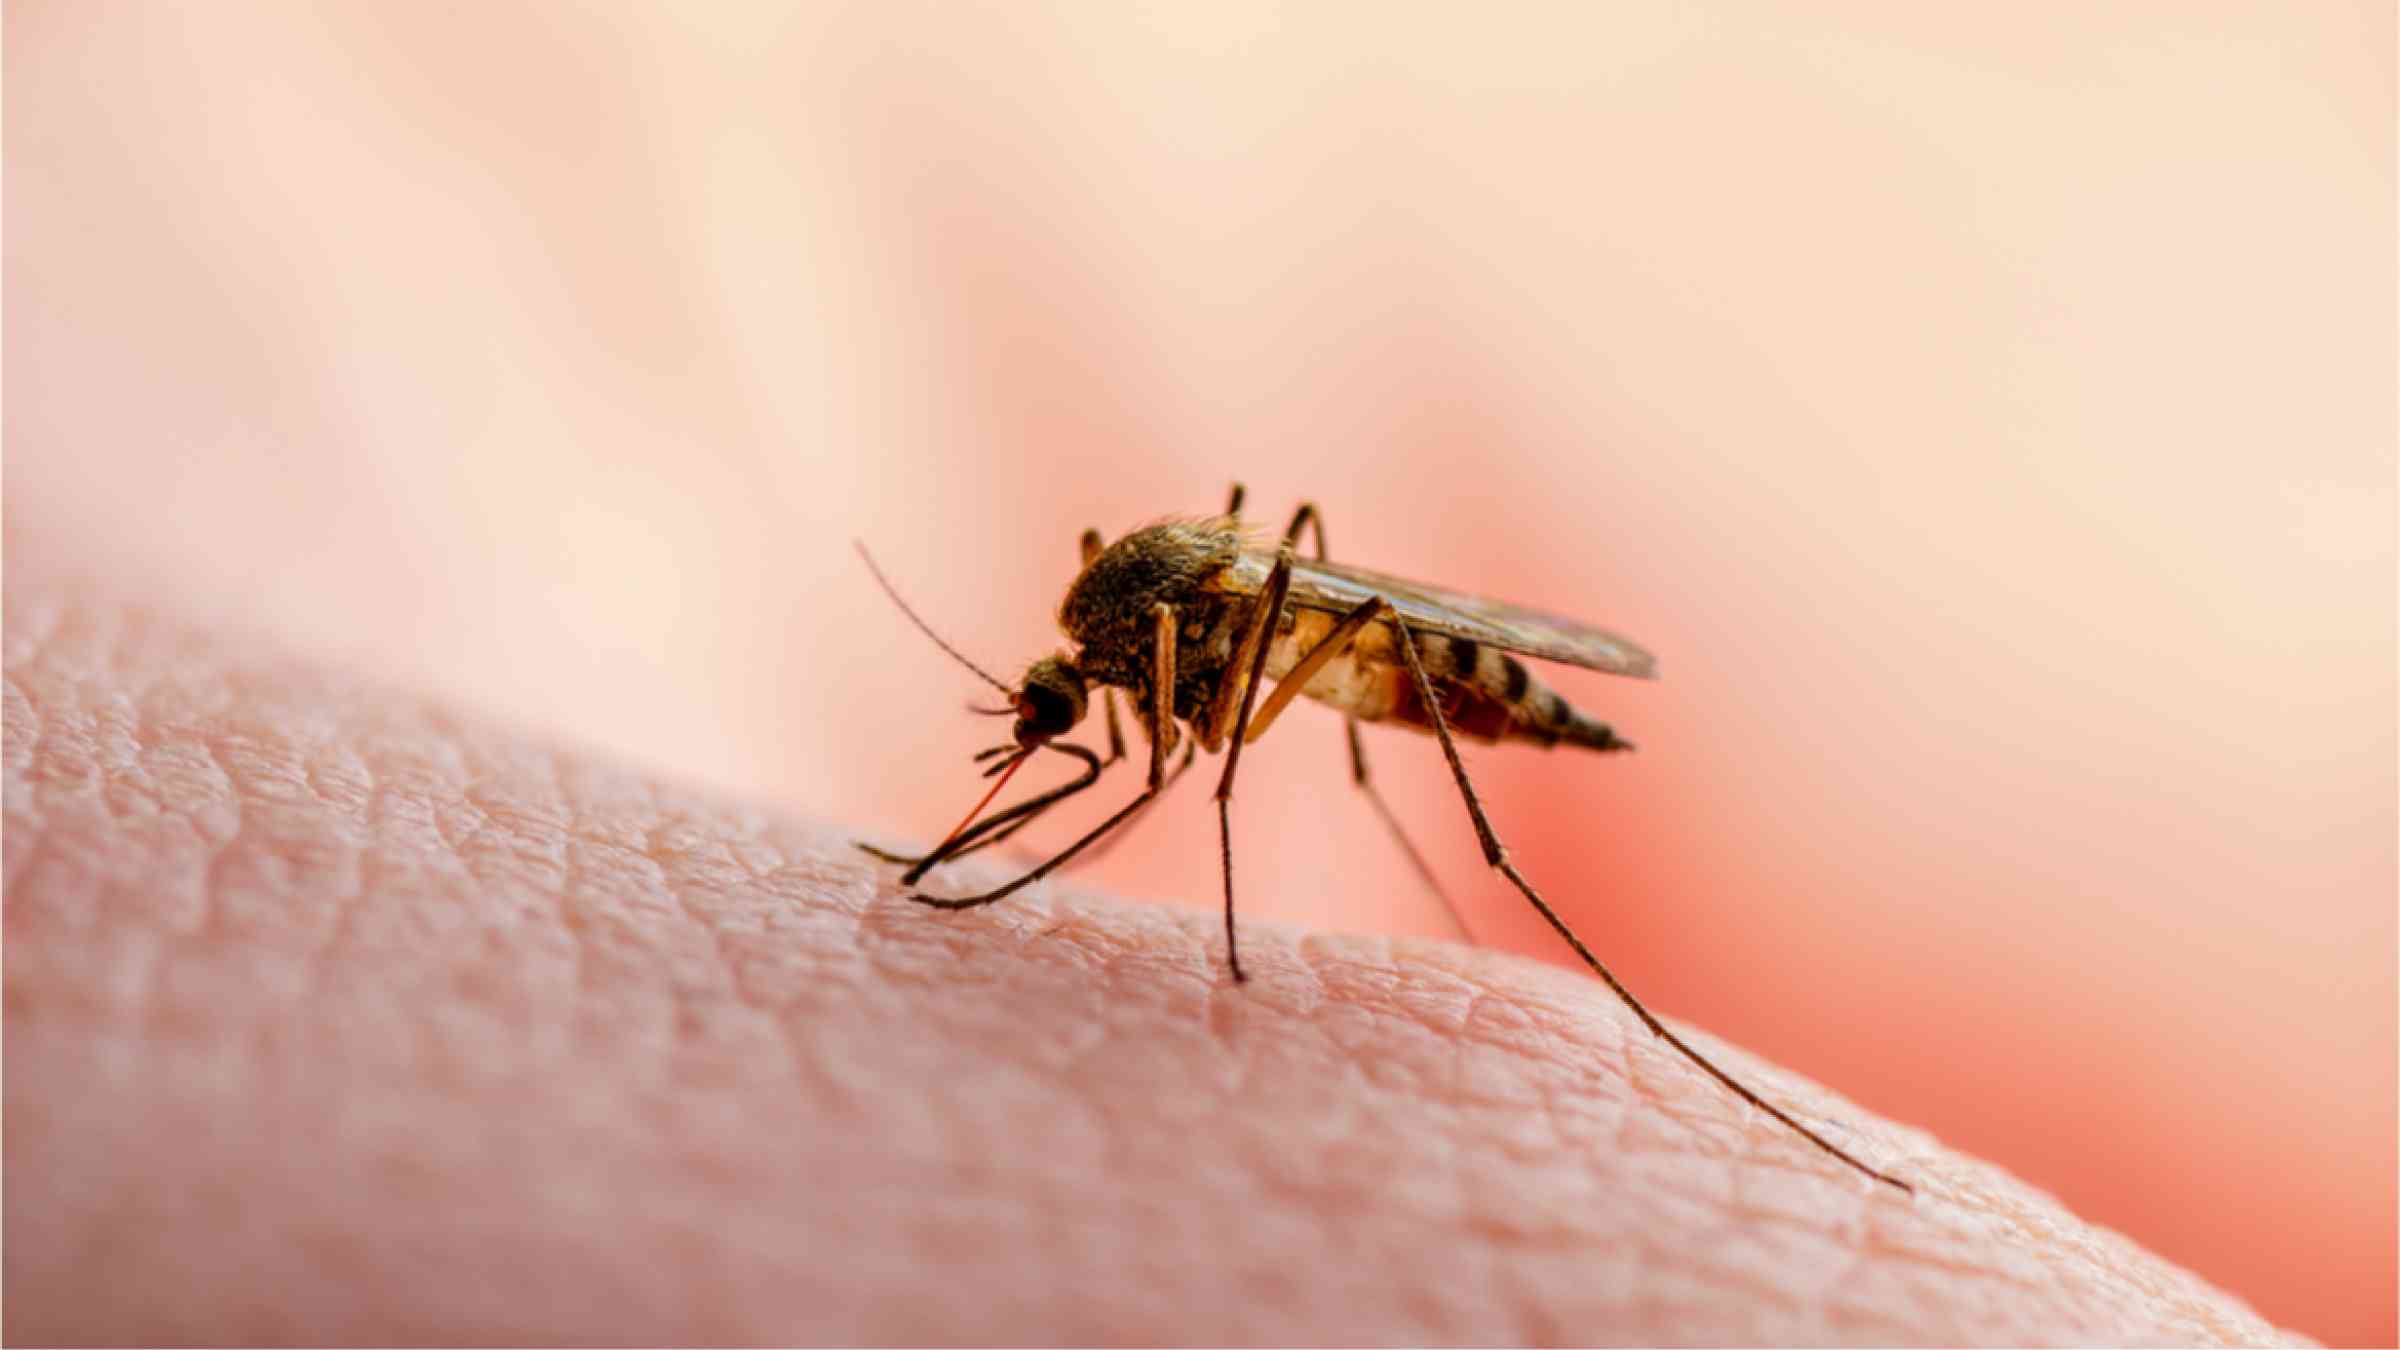 This image shows a mosquito sitting on human skin.